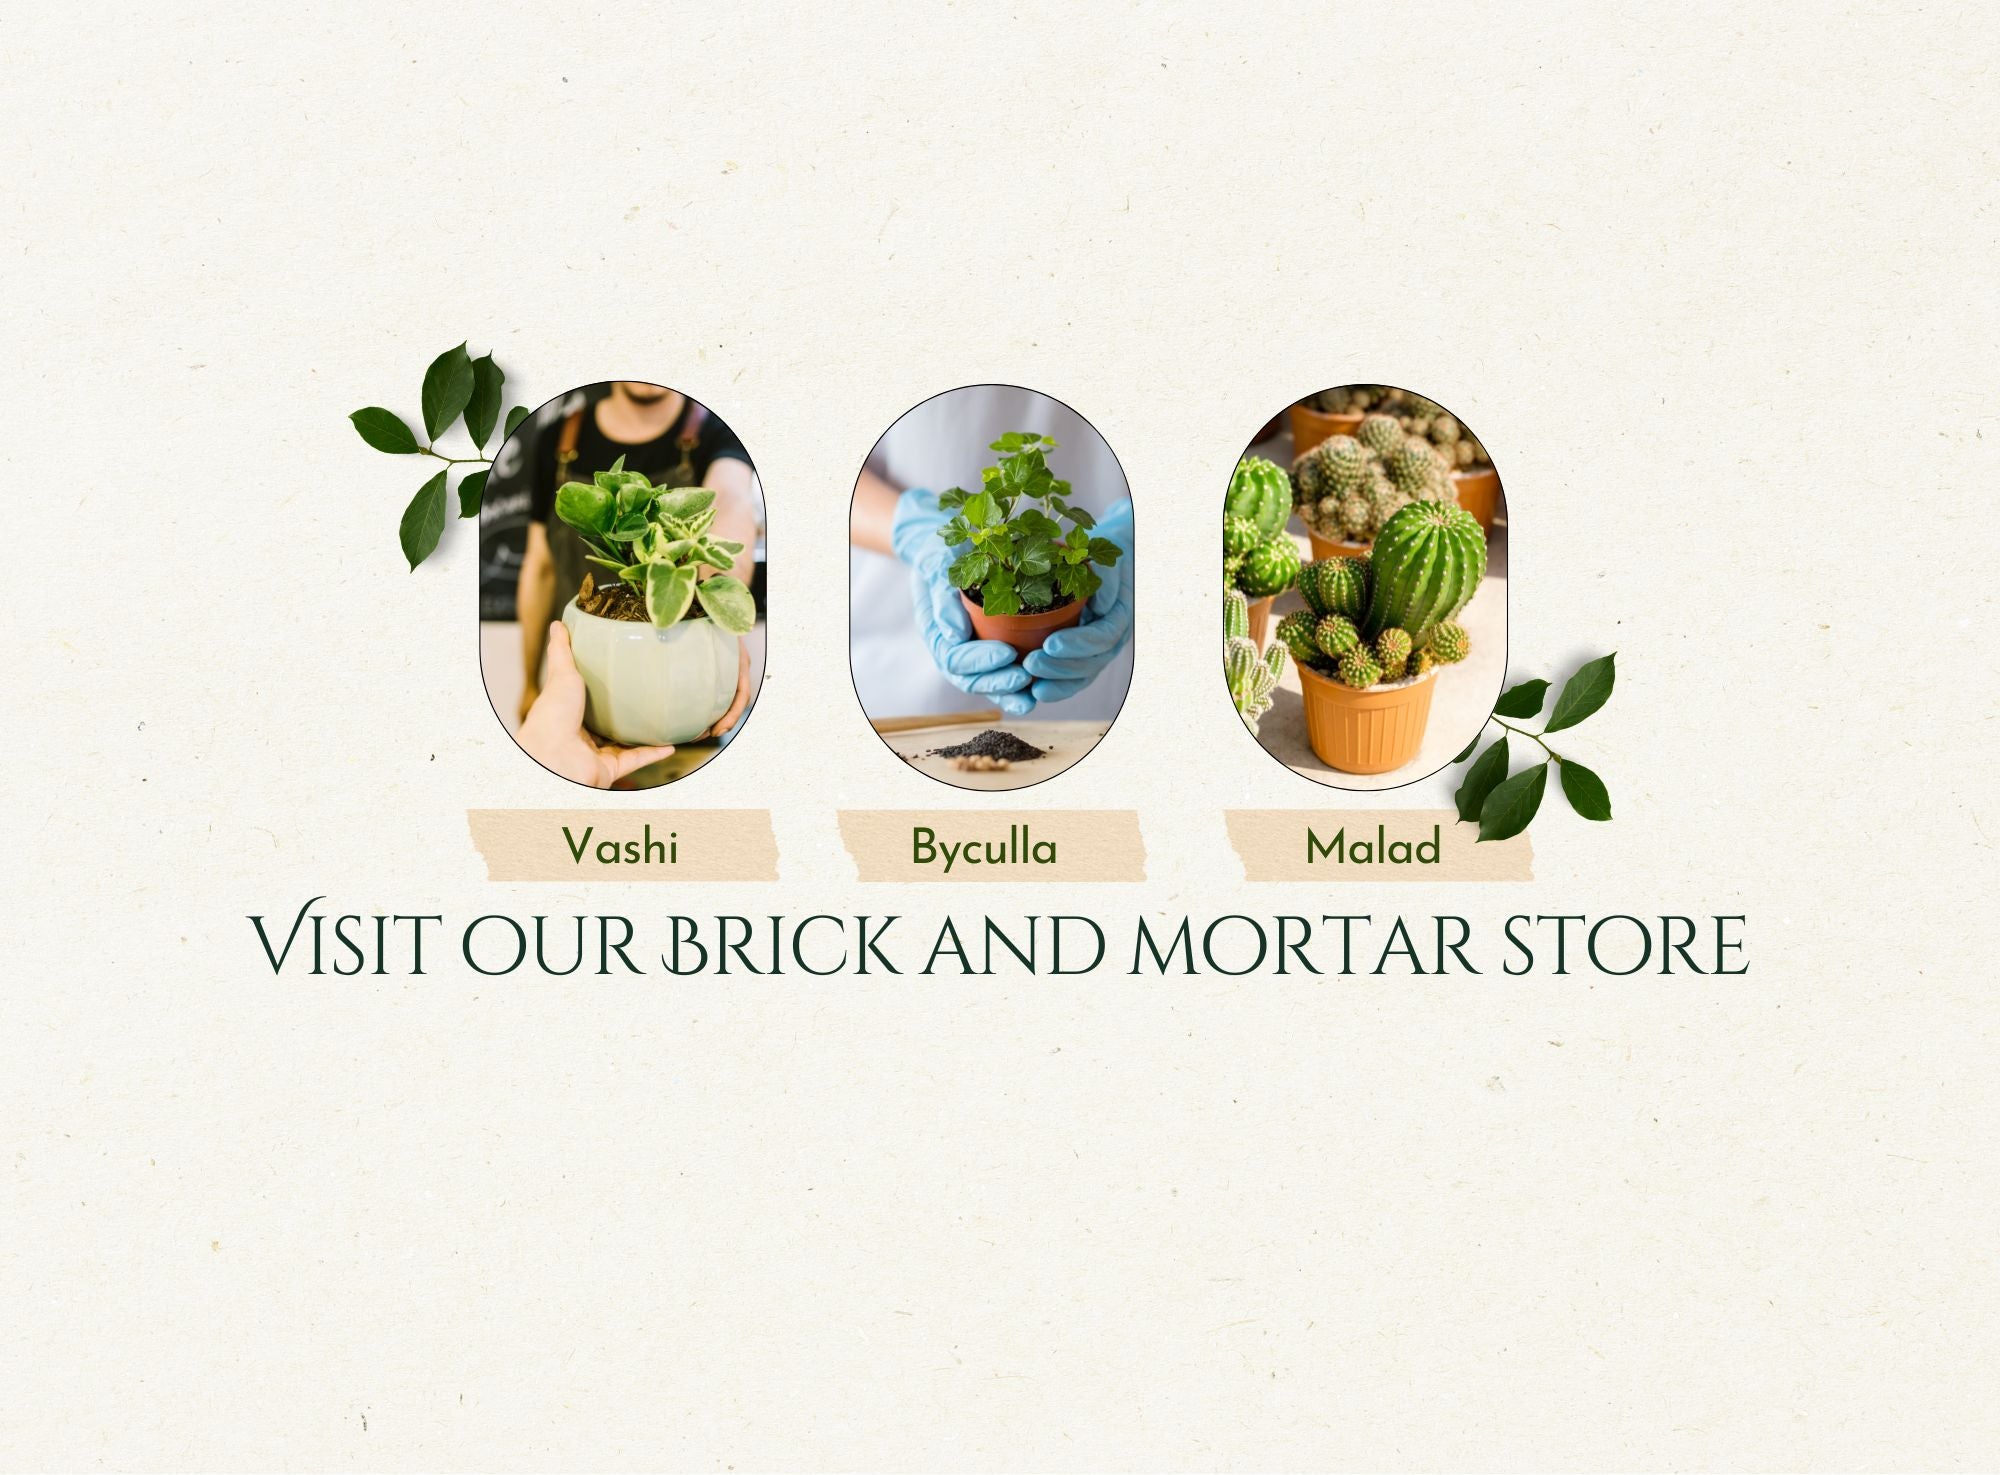 Visit our Brick and mortar stores